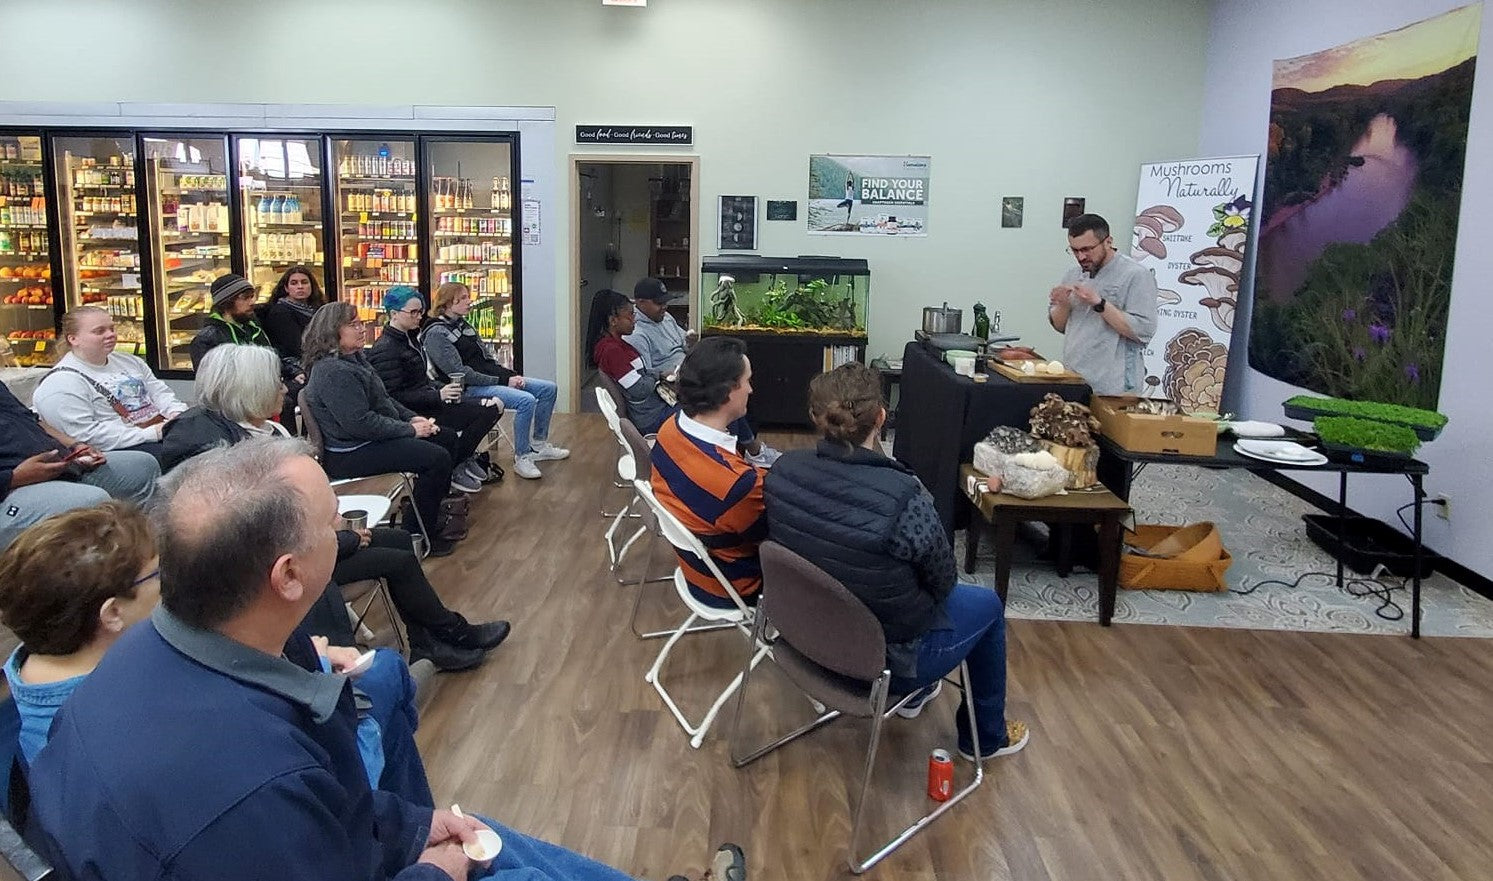 Mushrooms Naturally Special Events Class at Nutrition Stop